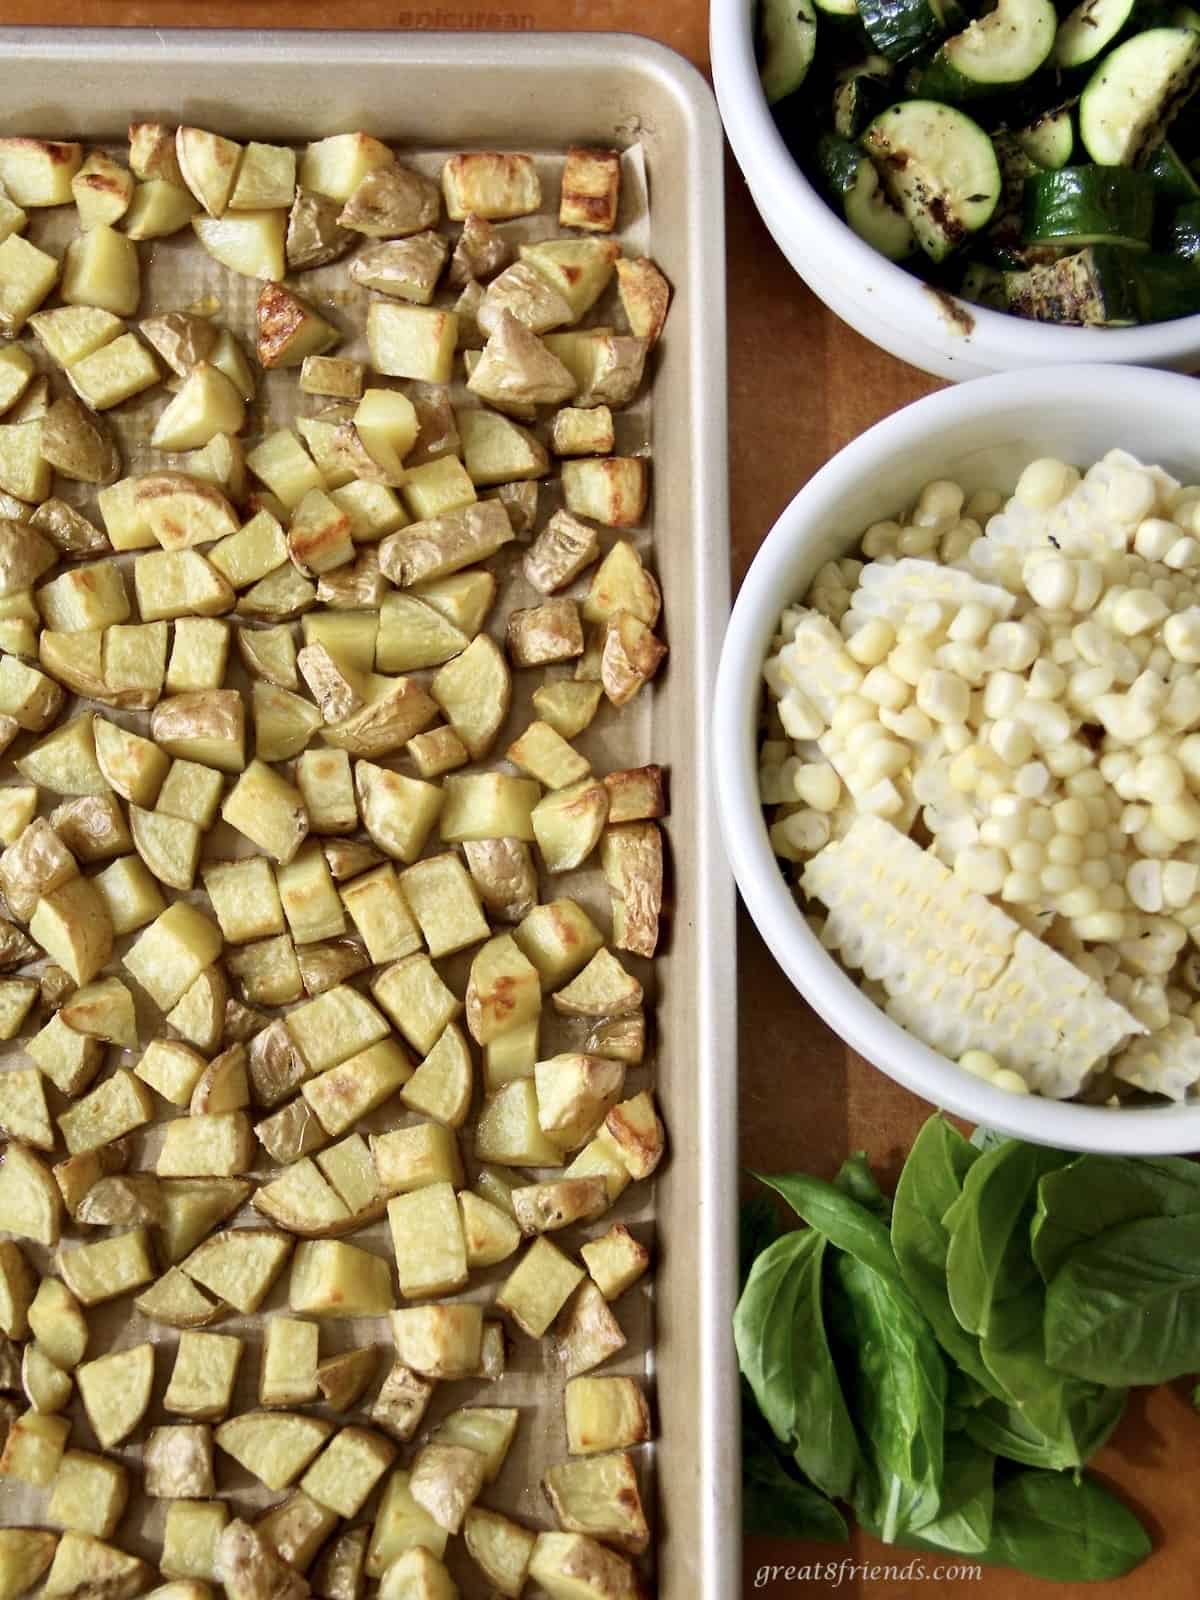 Diced roasted potatoes, grilled zucchini, grilled corn and basil laid out and ready to be combined in a salad bowl.